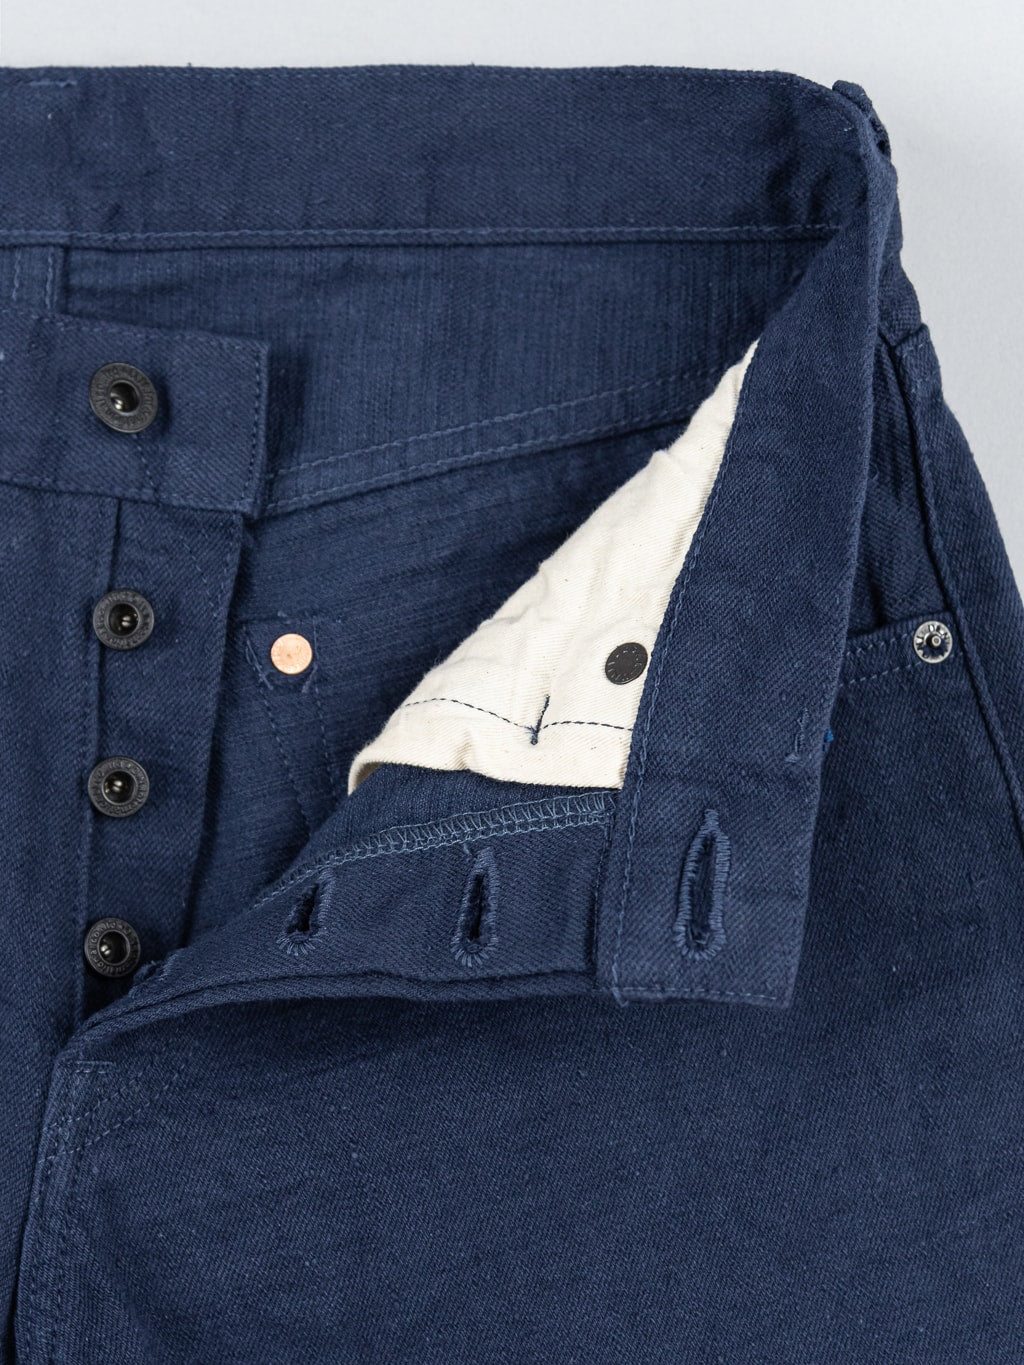 ONI Denim 612 Super Low Tension Navy Relaxed Tapered Jeans buttons